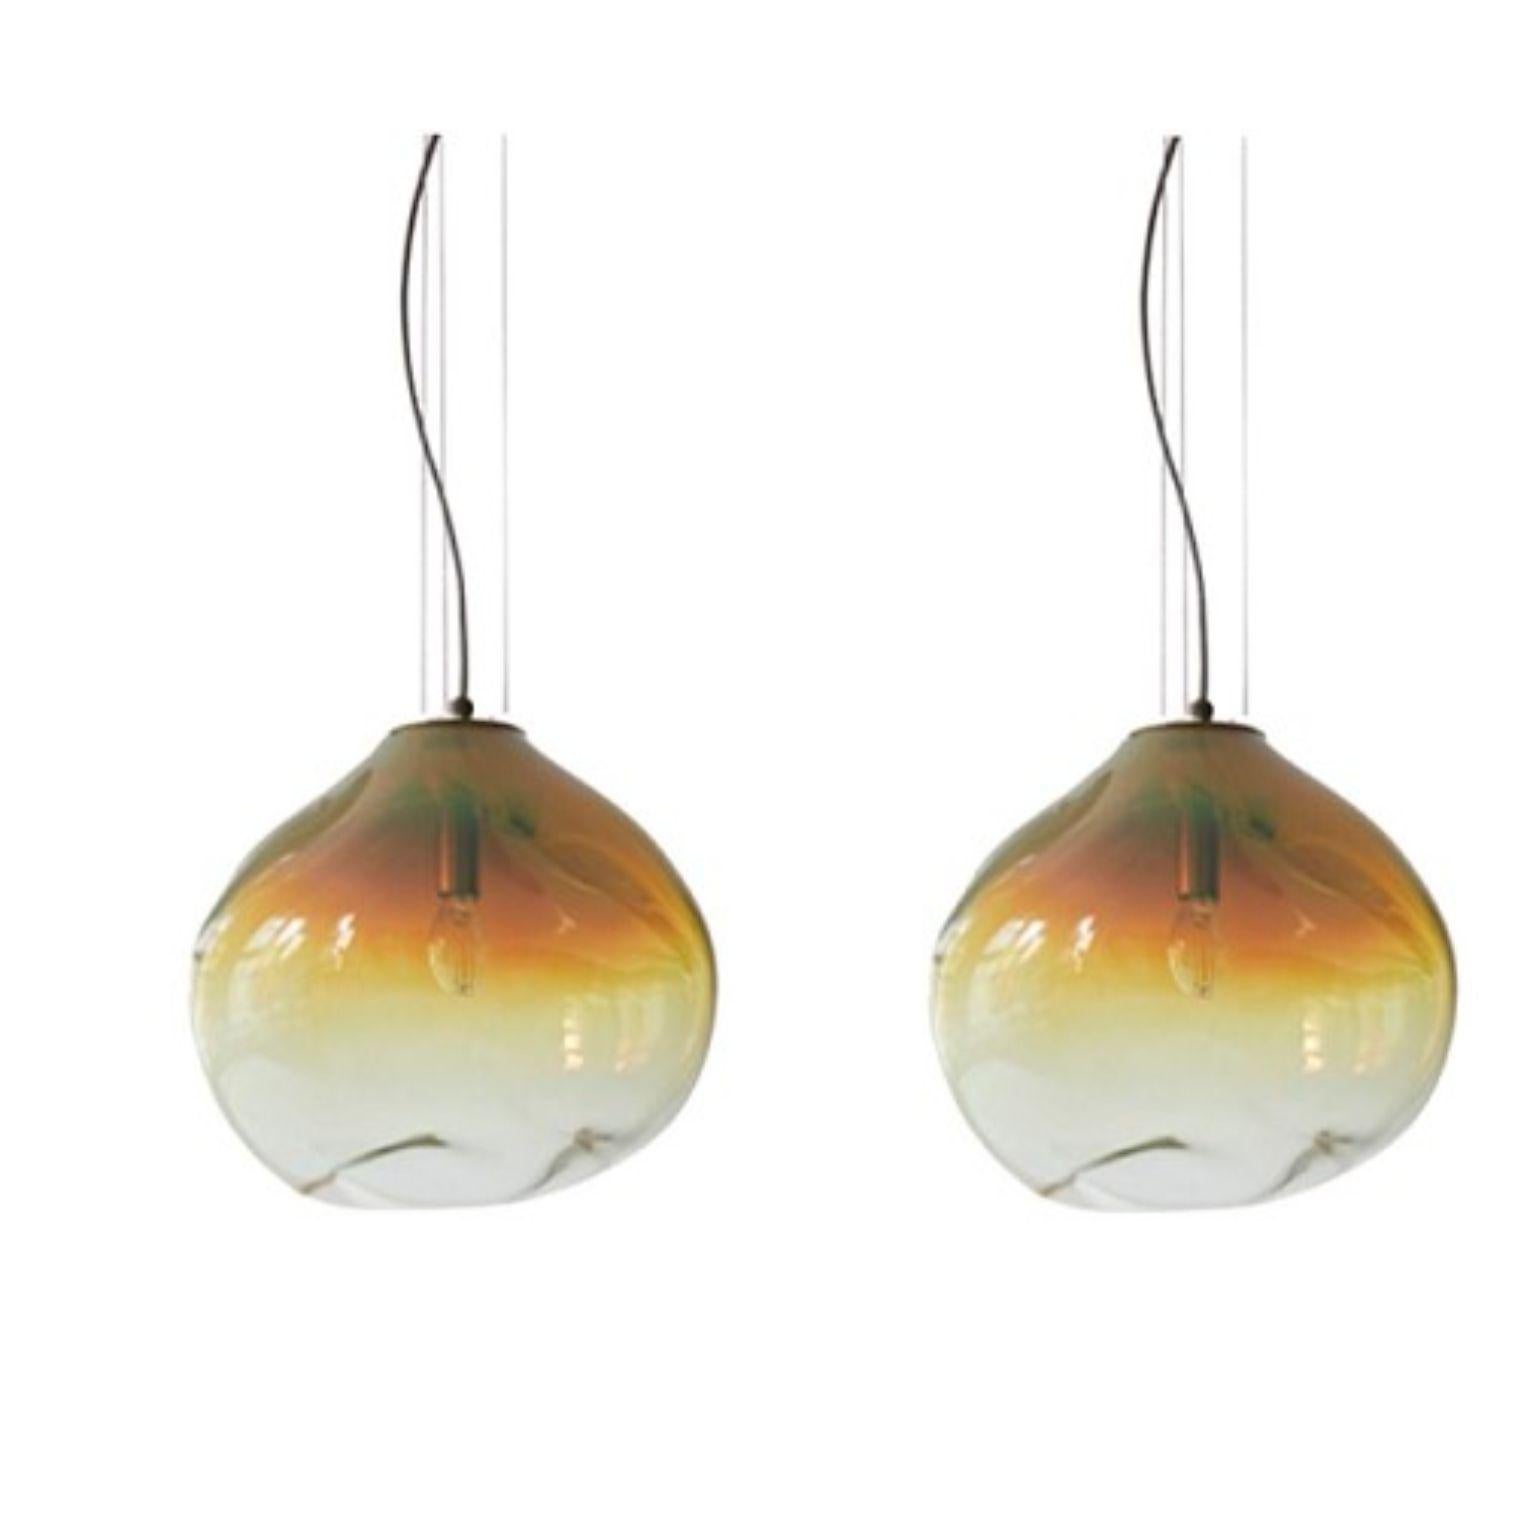 Set of 2 Haumea Amorph amber iridescent M pendants by Eloa.
No UL listed 
Material: glass, steel, silver, LED bulb.
Dimensions: D30 x W32 x H27 cm
Also available in different colours and dimensions.

All our lamps can be wired according to each